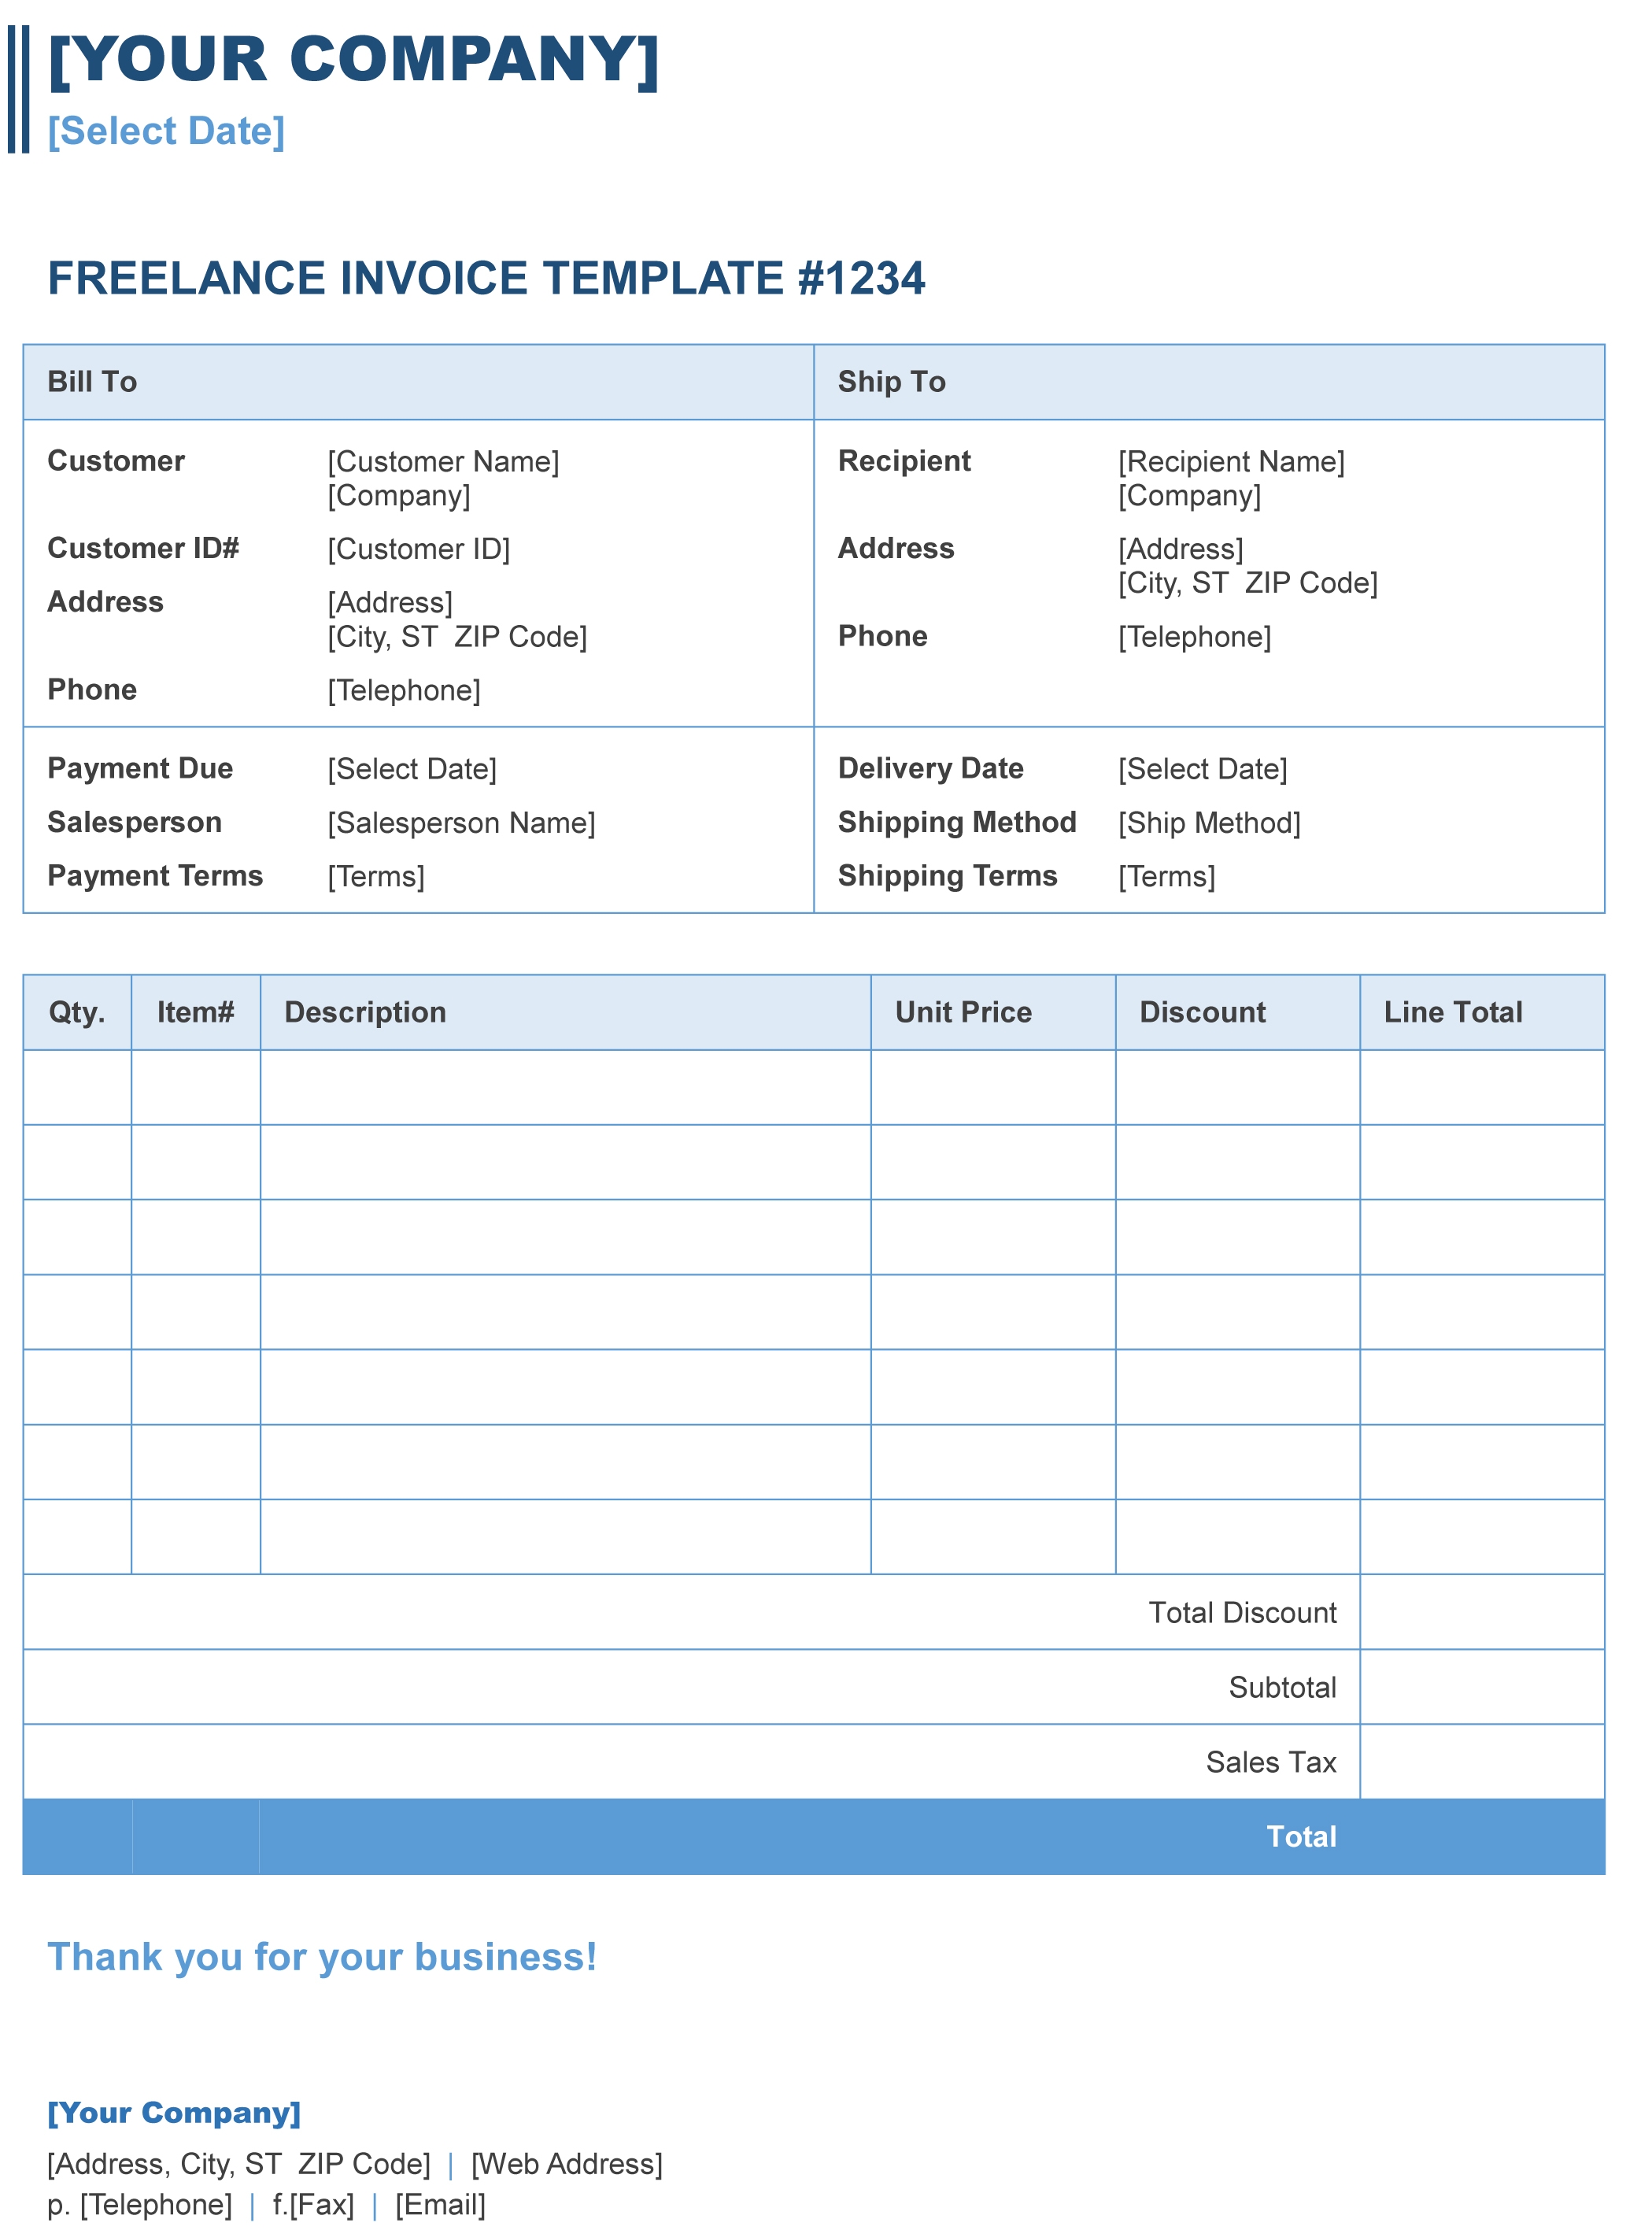 invoice template word goodshows invoice template in word